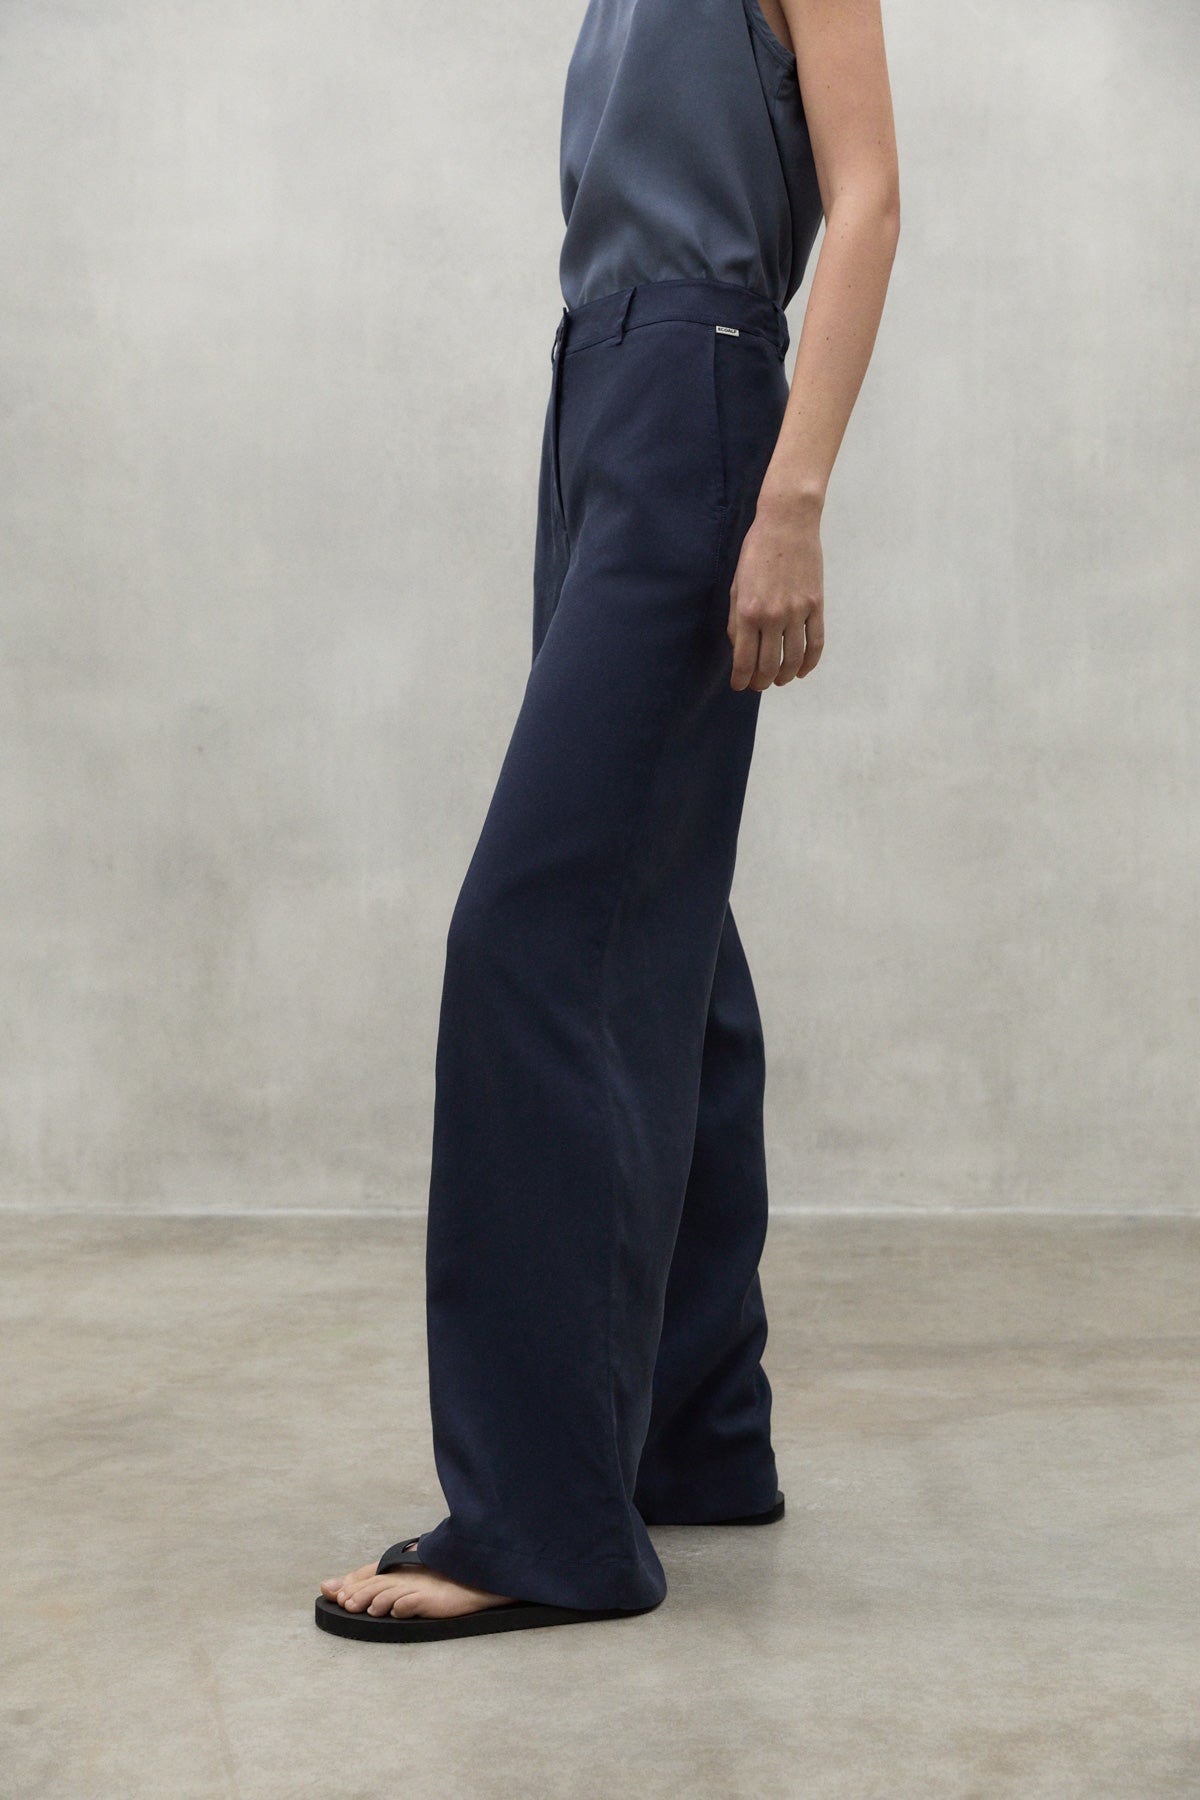 NAVY BLUE SABINE TROUSERS